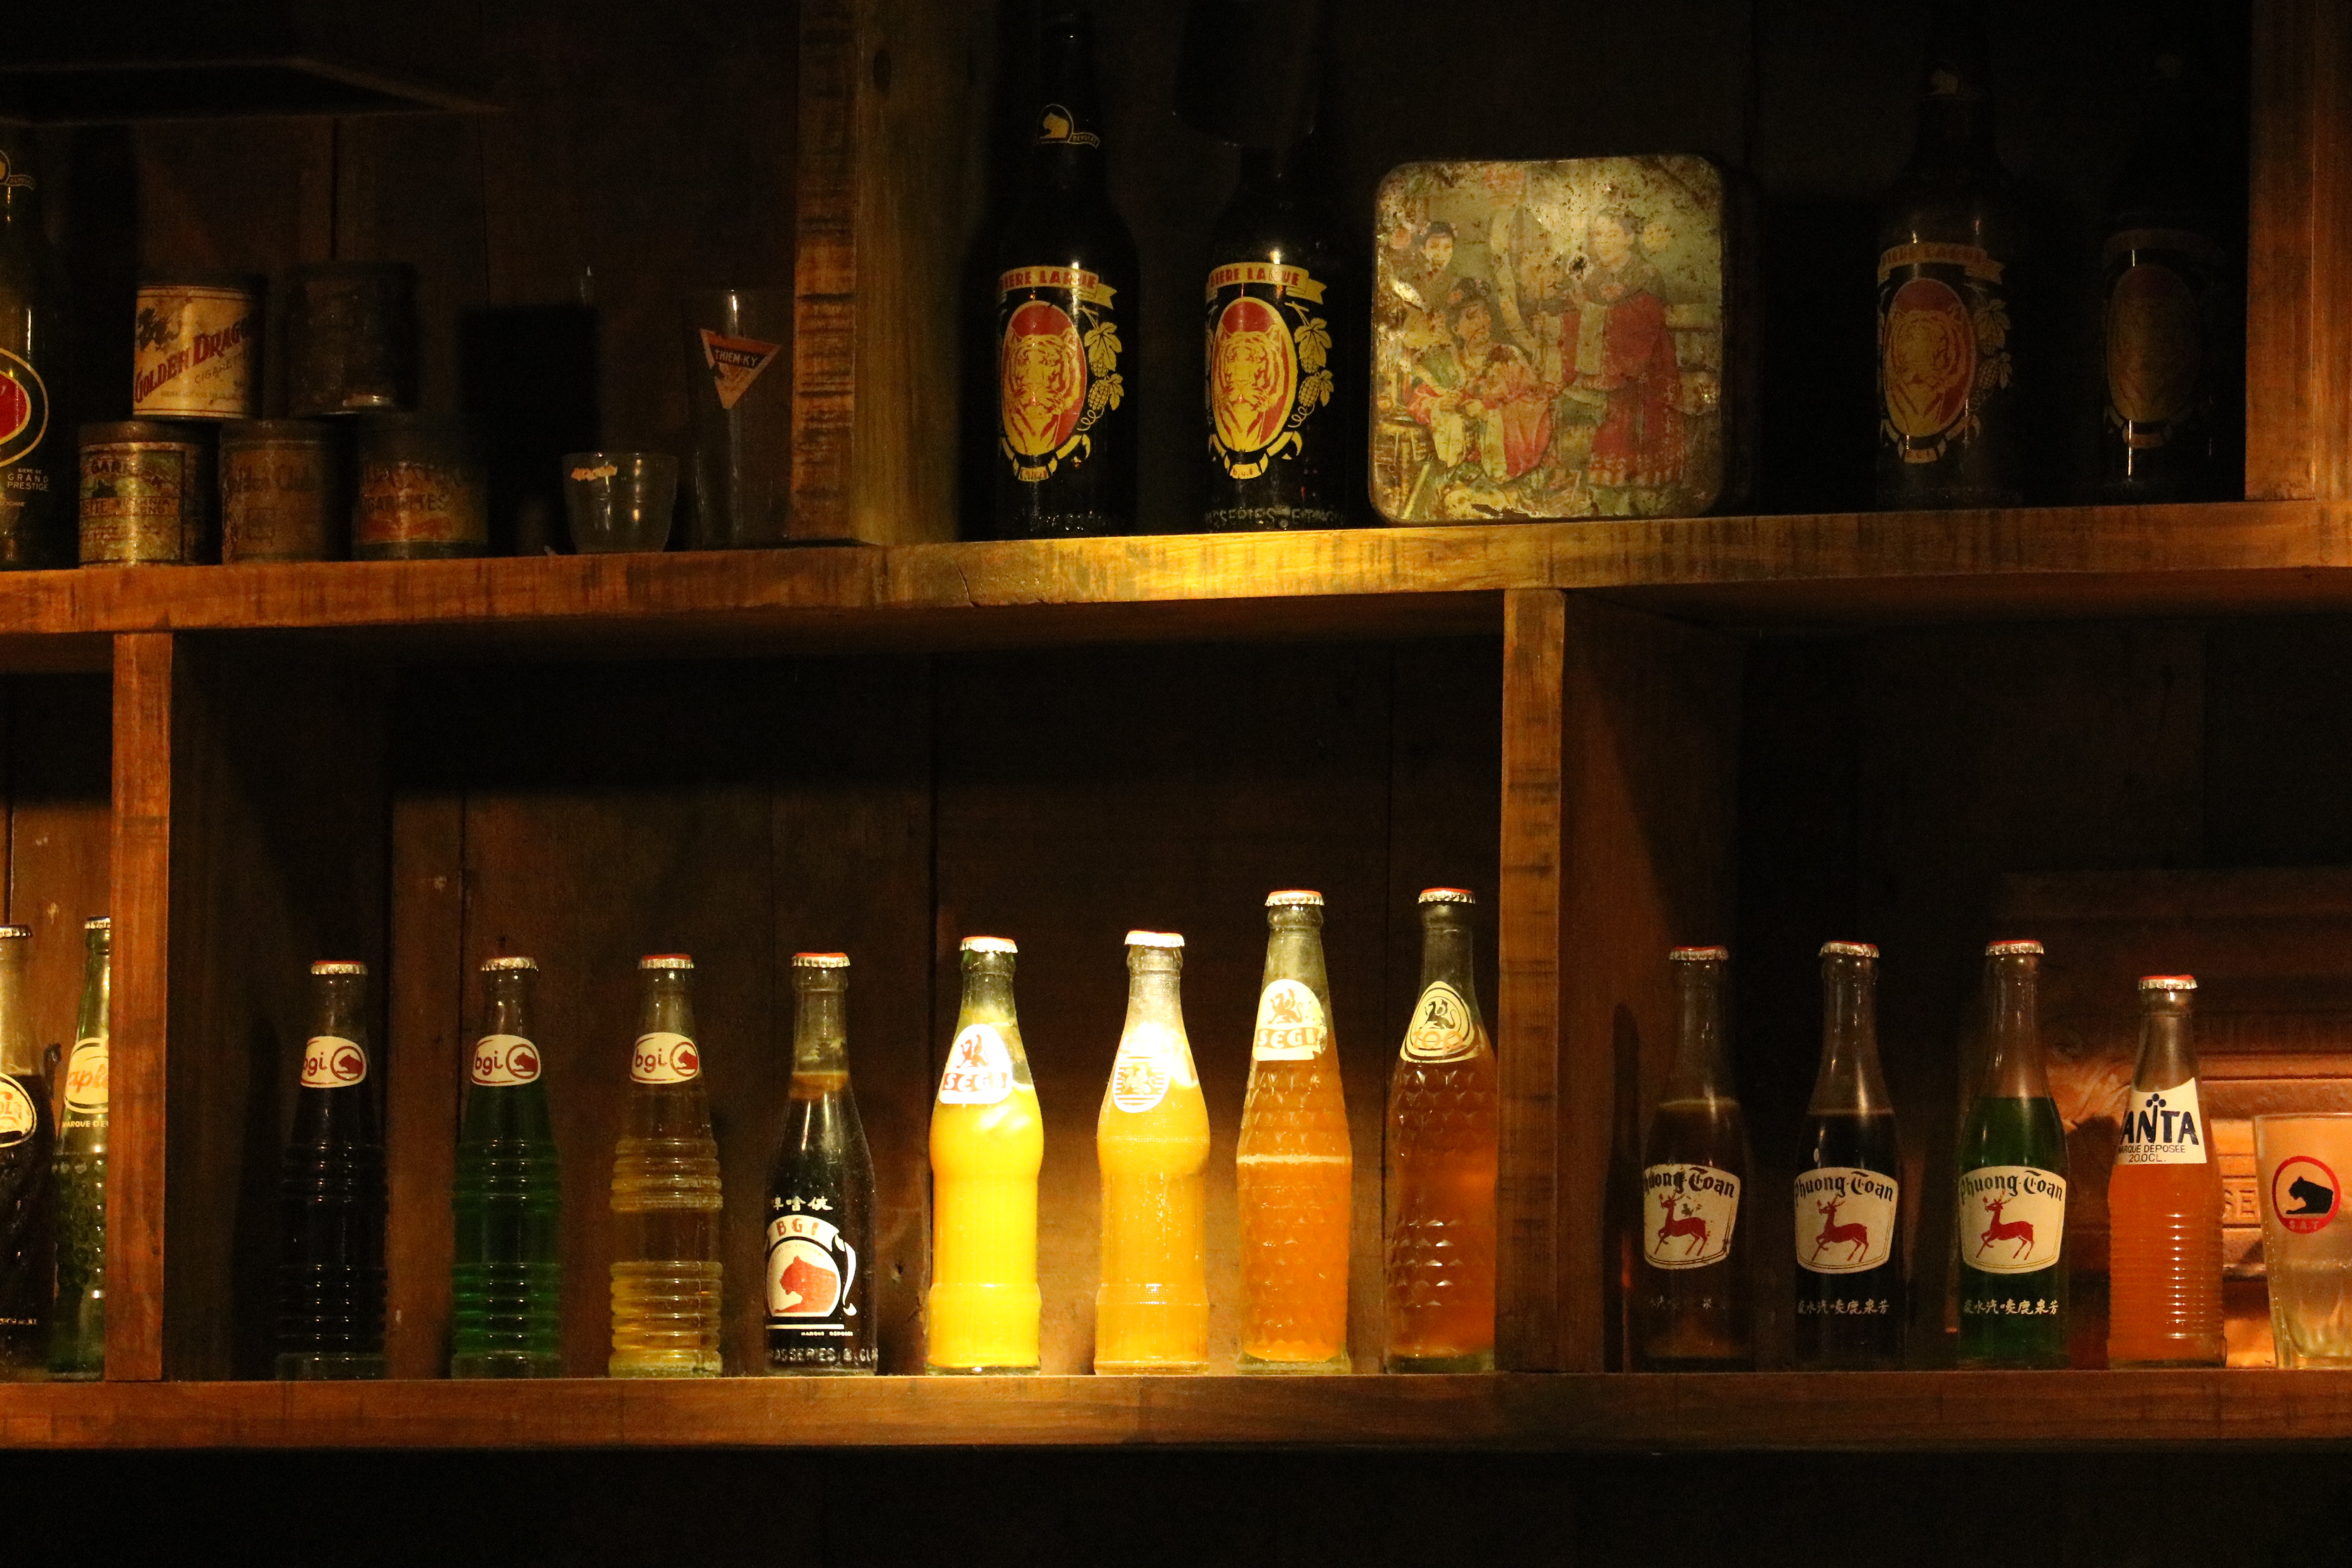 Drinks which were popular in the 80s and 90s on display at Lua Sai Gon café in Phu Nhuan District, Ho Chi Minh City. Photo: Hoang An / Tuoi Tre News